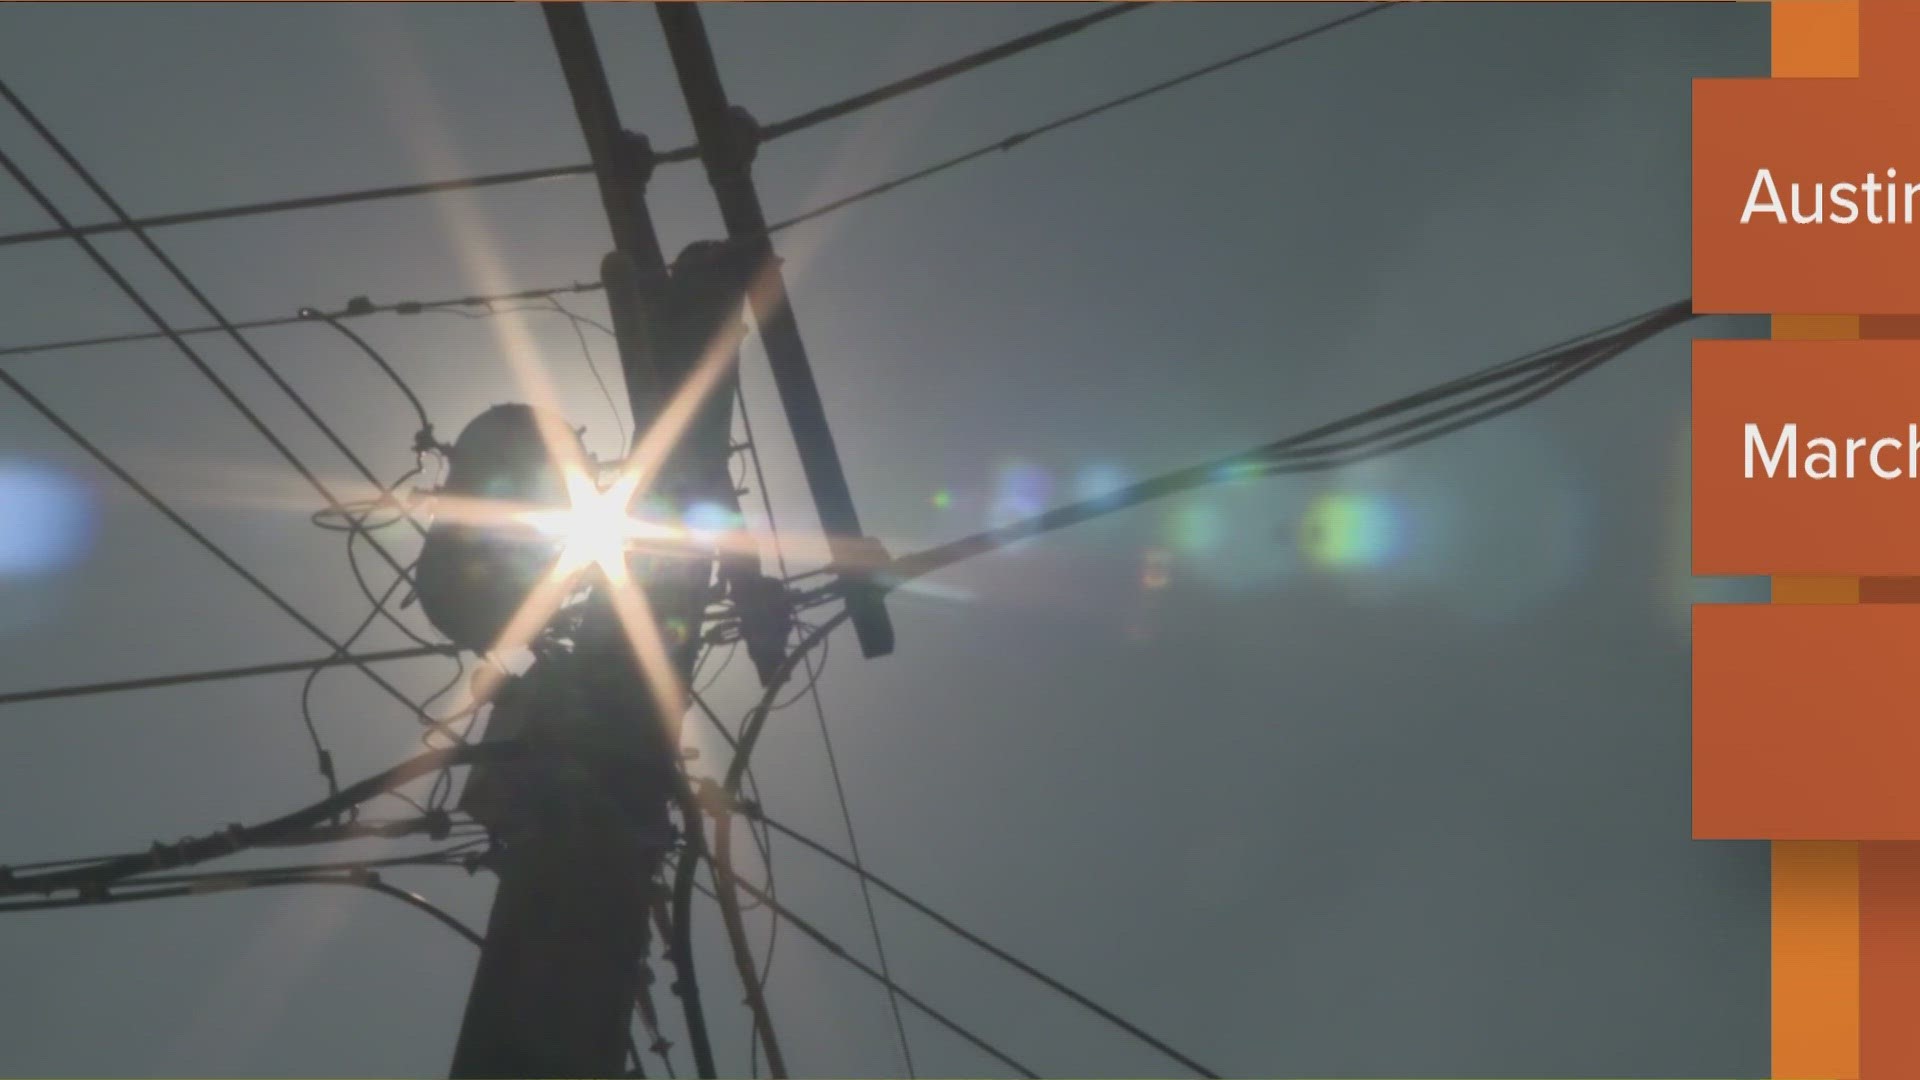 Starting this month, Austin Energy customers will pay more for power.